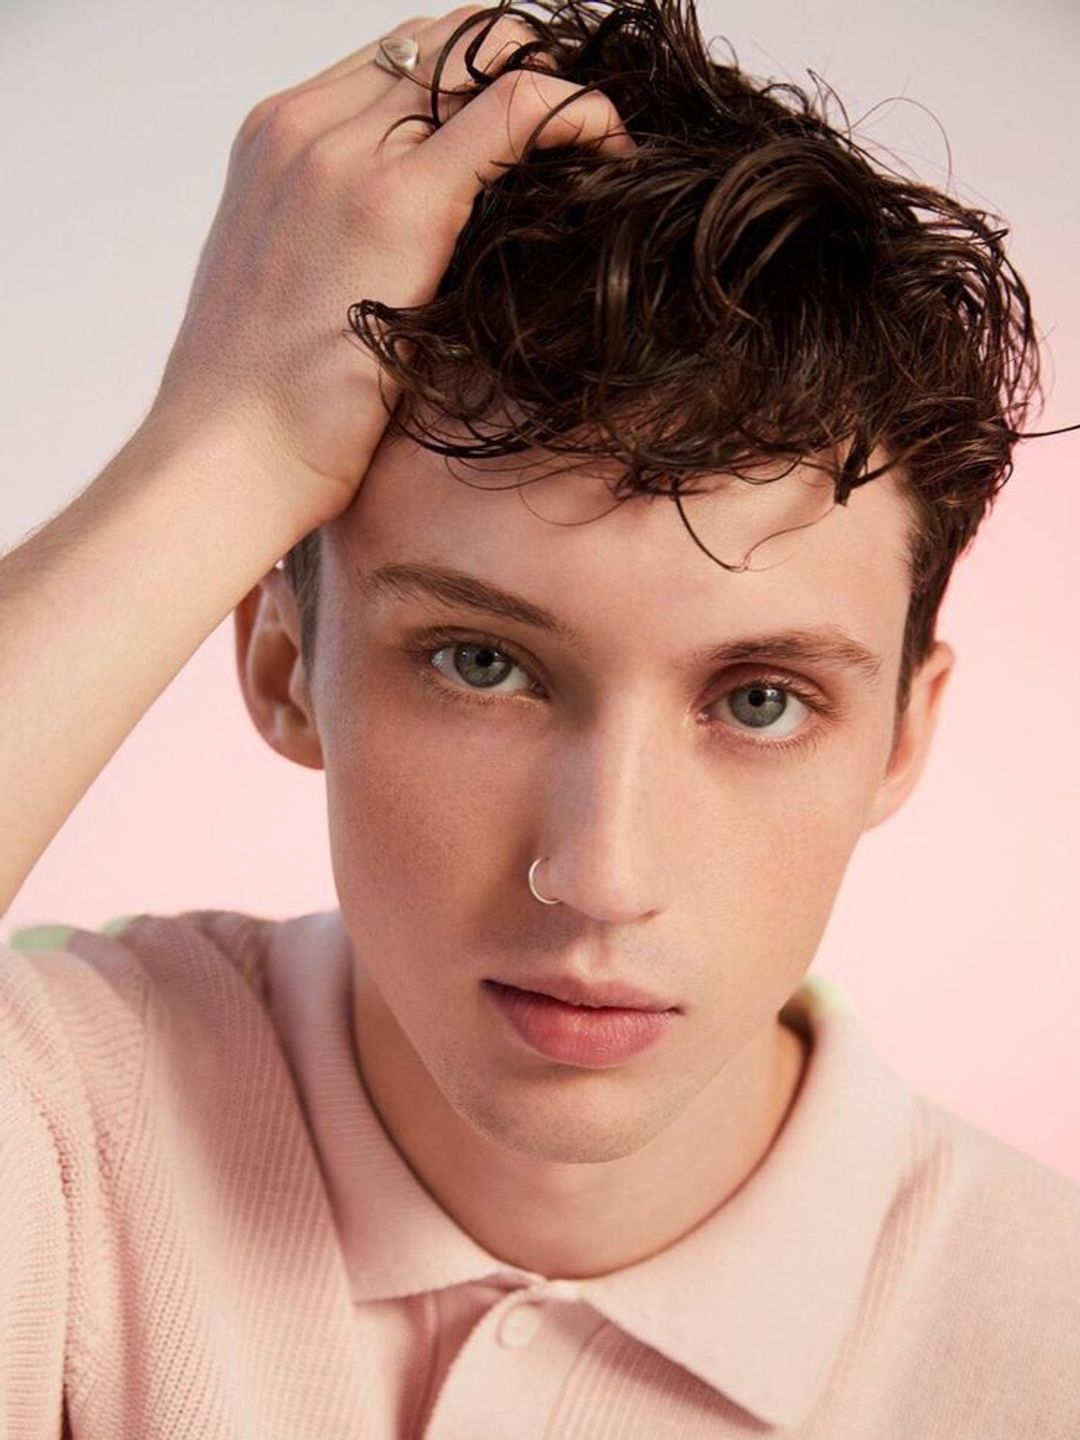 Troye Sivan who is his father